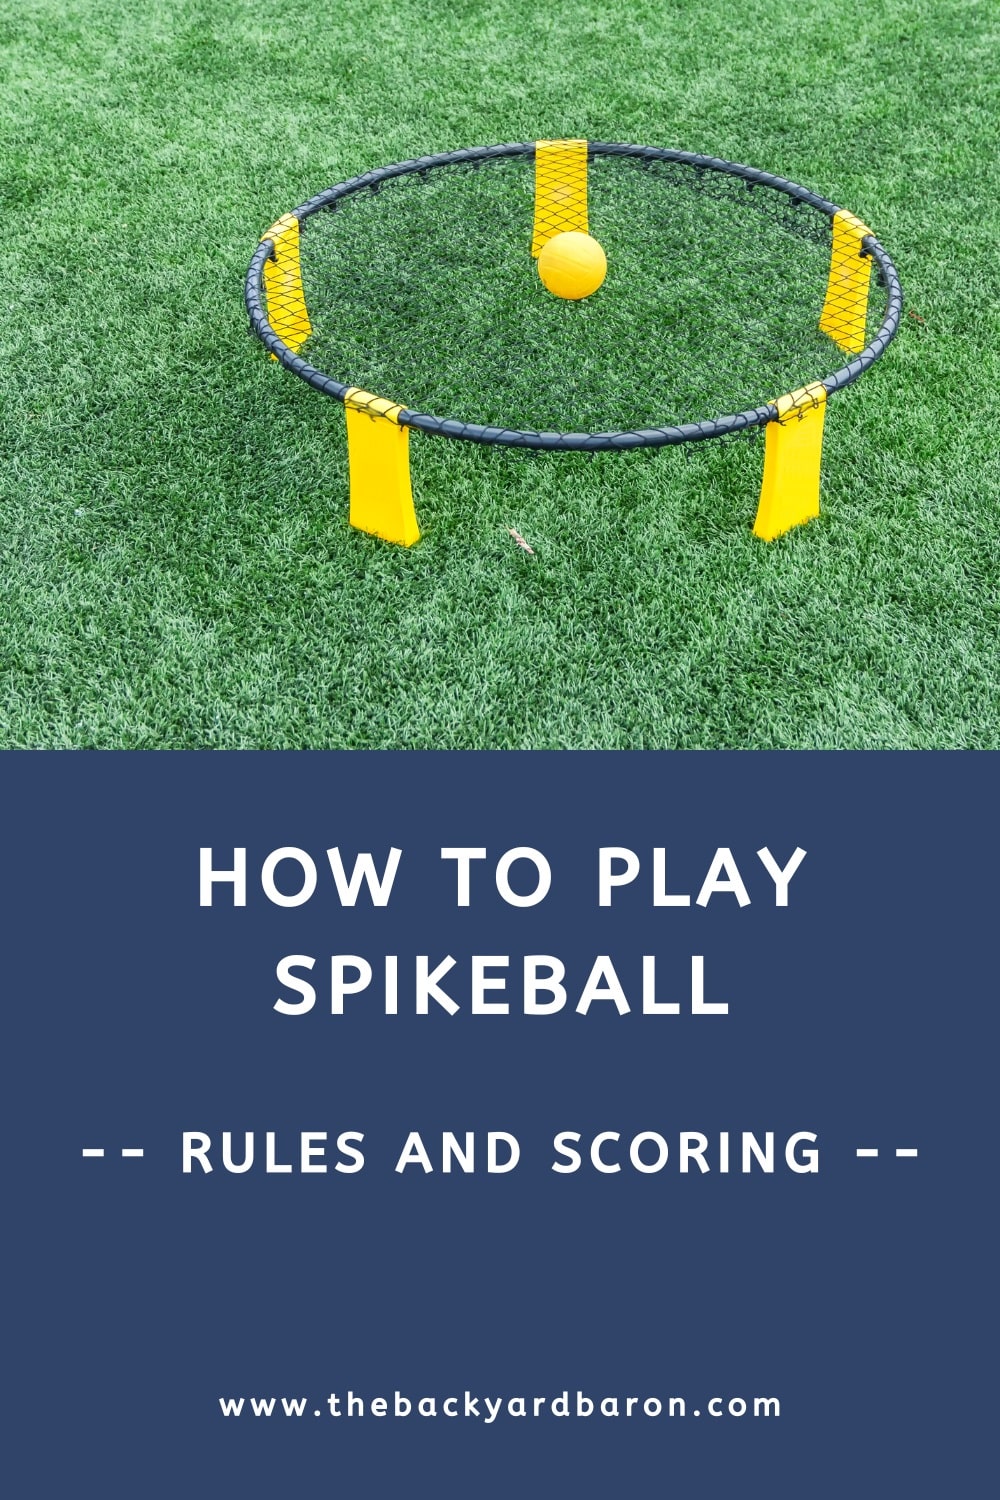 How to play spikeball (rules and scoring)